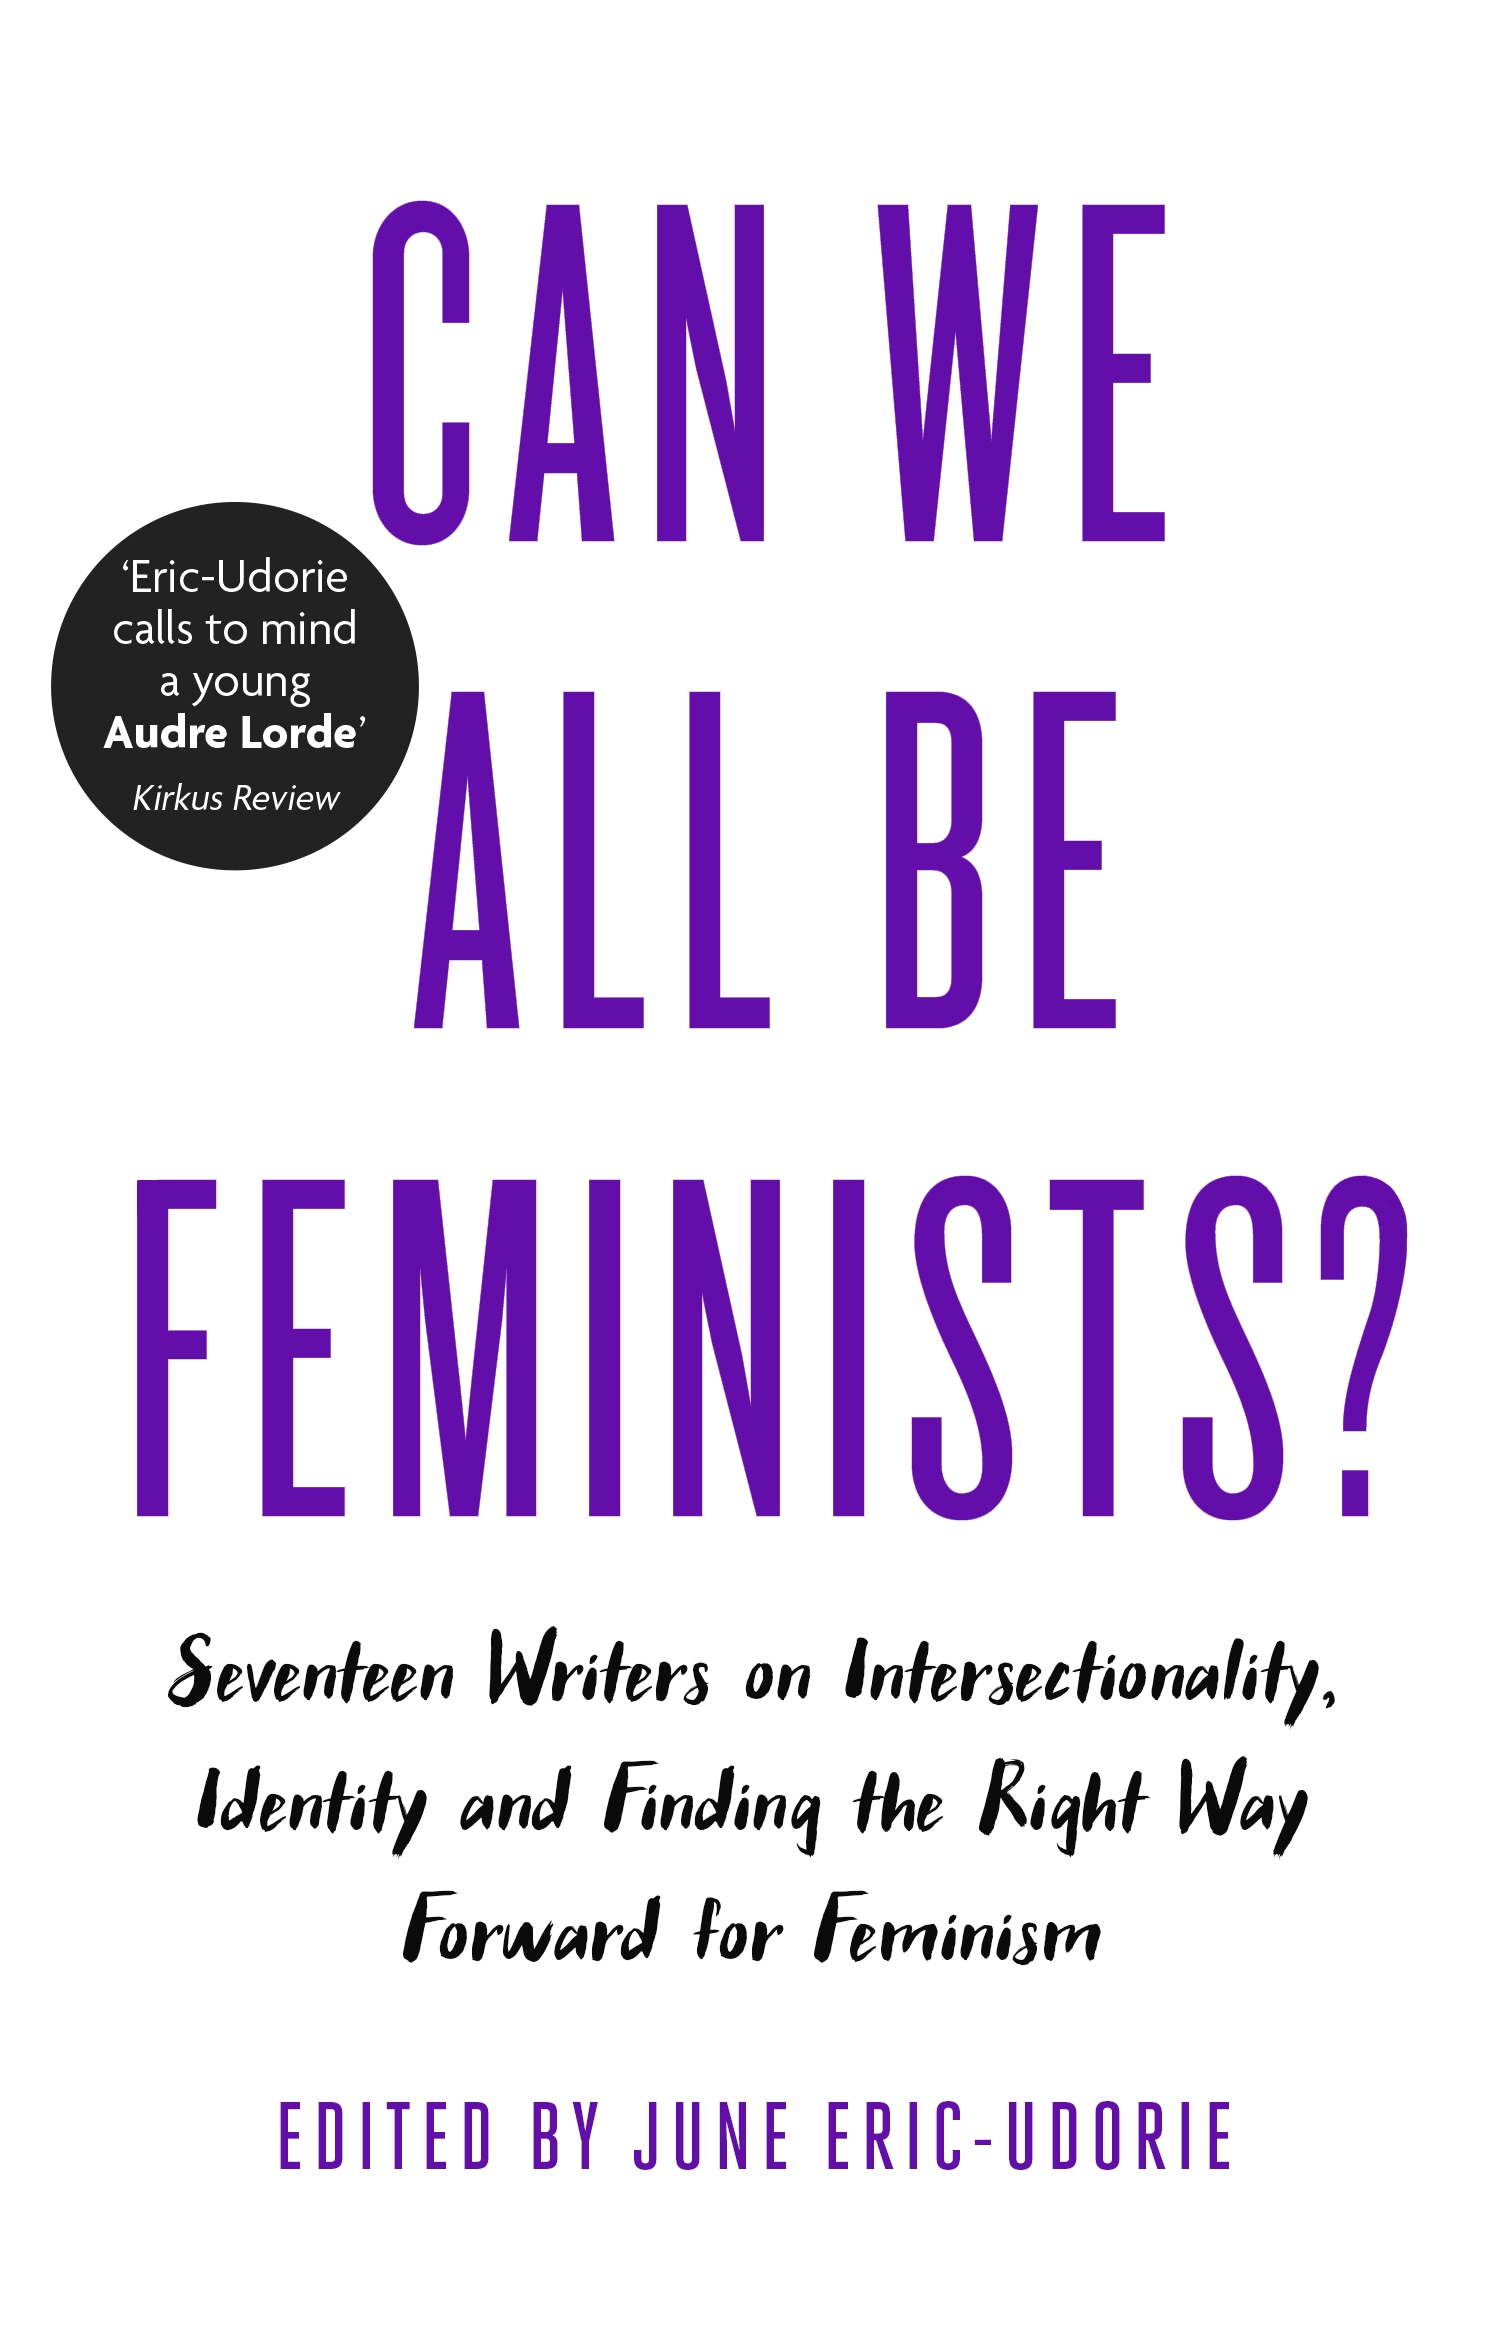 Can We All Be Feminists? by June Eric-Udorie | Hachette UK